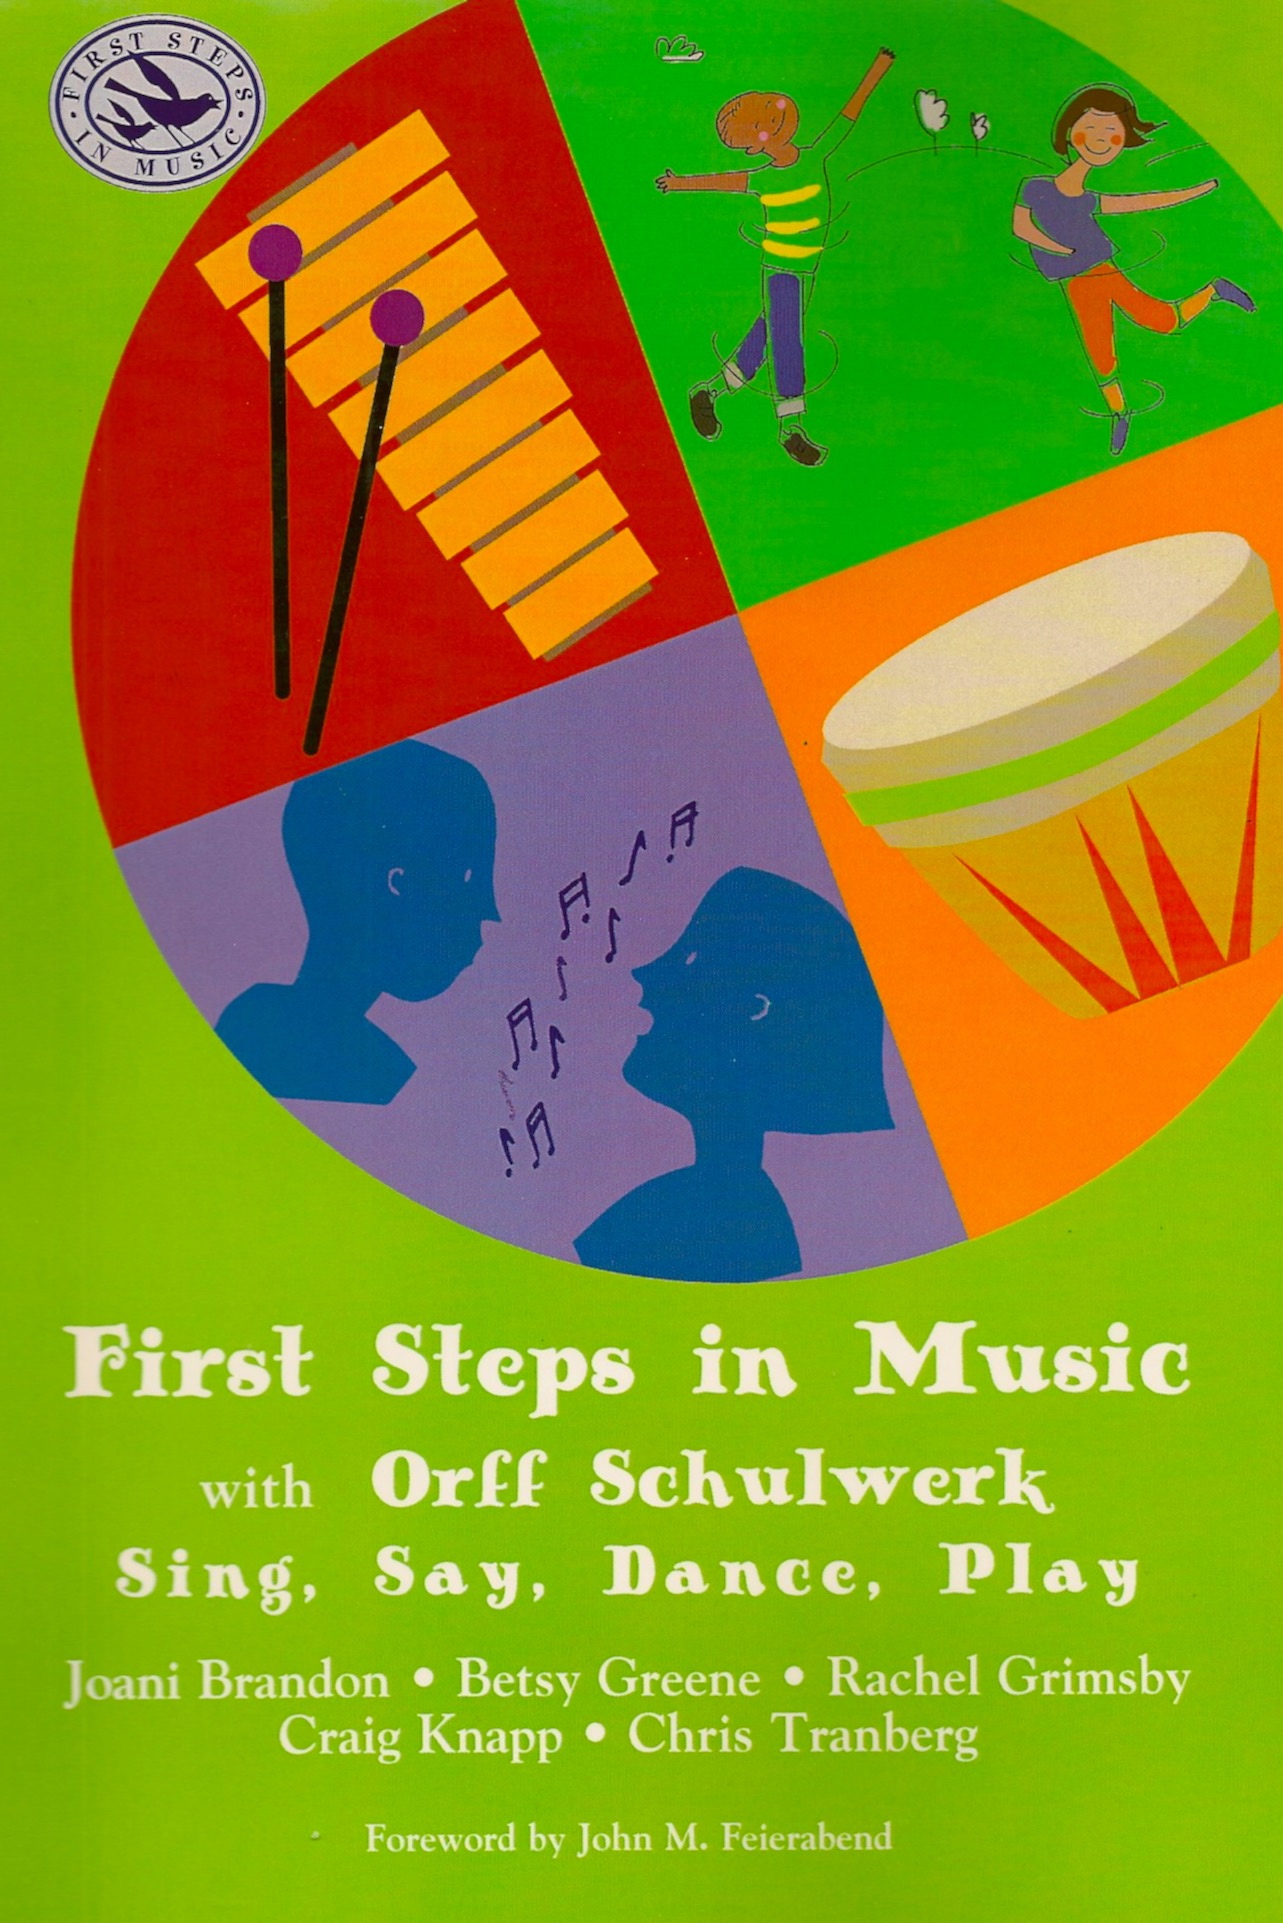 First Steps in Music with Orff Schulwerk: Sing, Say, Dance, Play<br>Joani Brandon, Betsy Greene, Rachel Grimsby, Craig Knapp, and Chris Tranberg